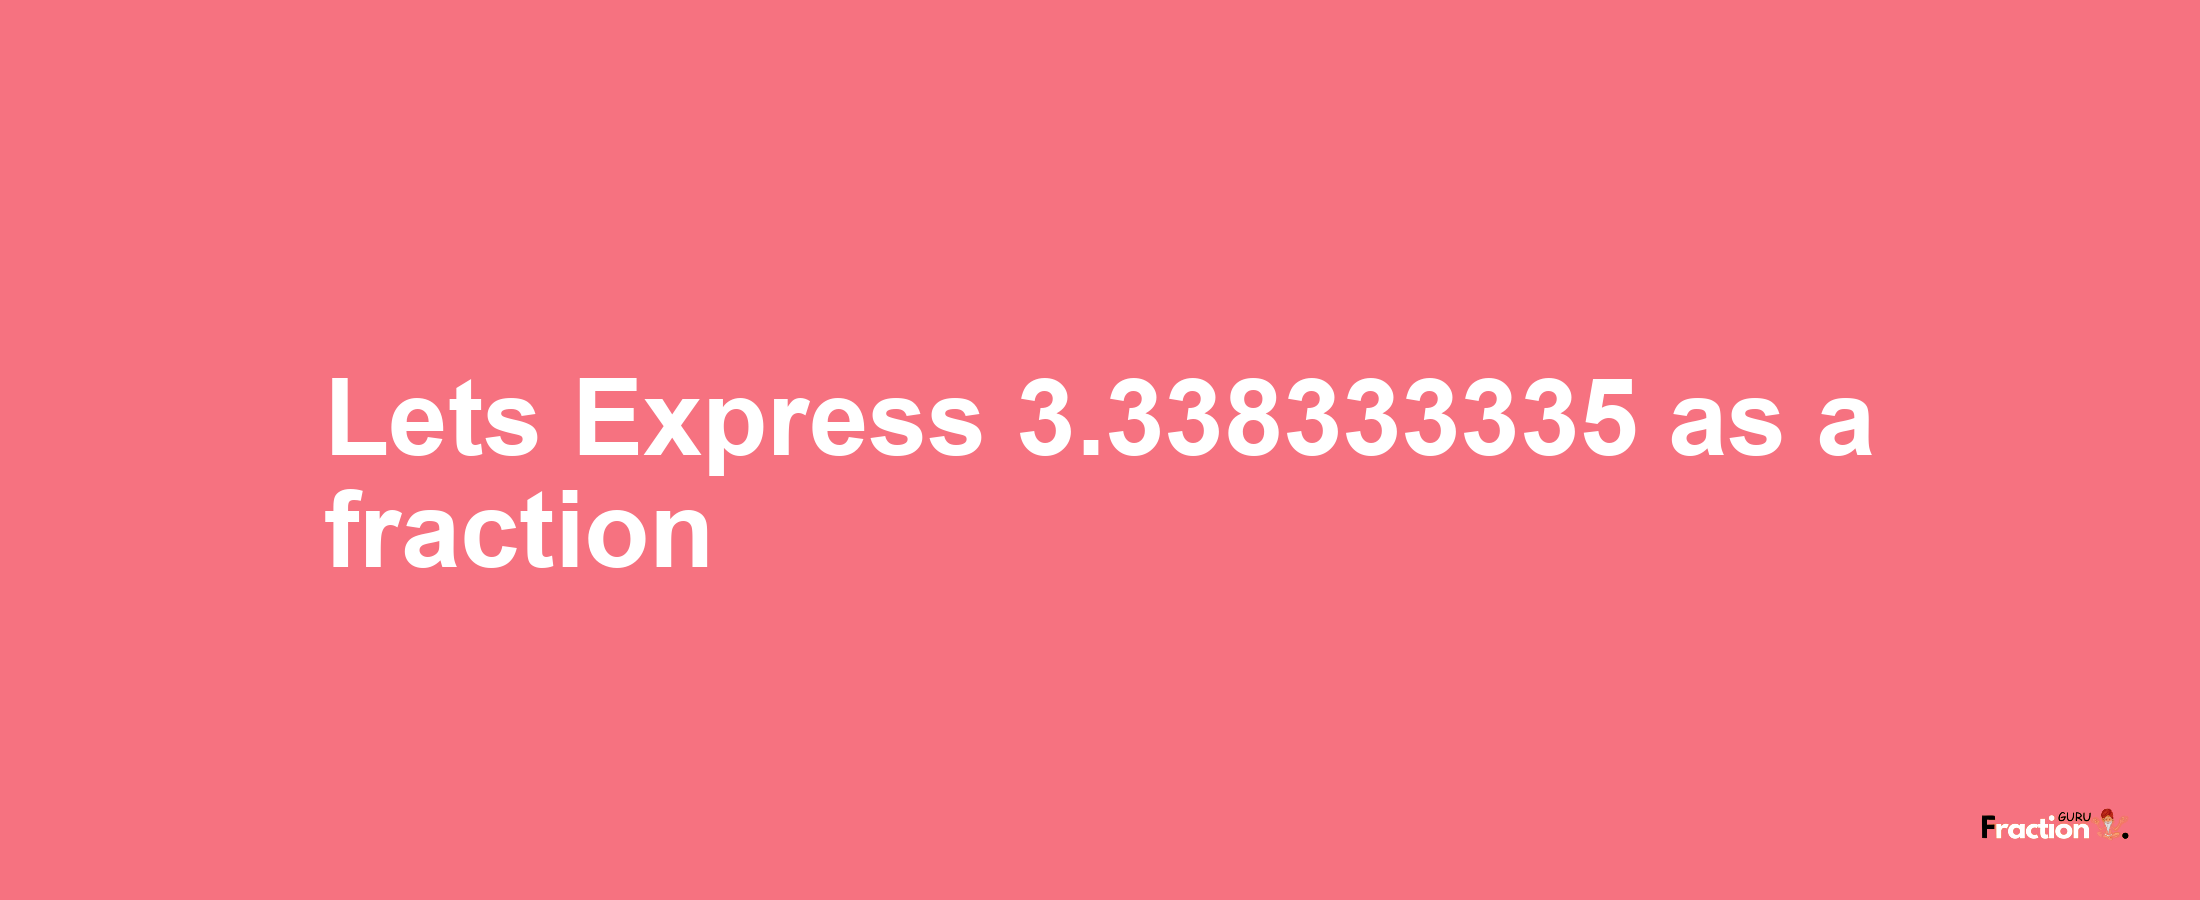 Lets Express 3.338333335 as afraction